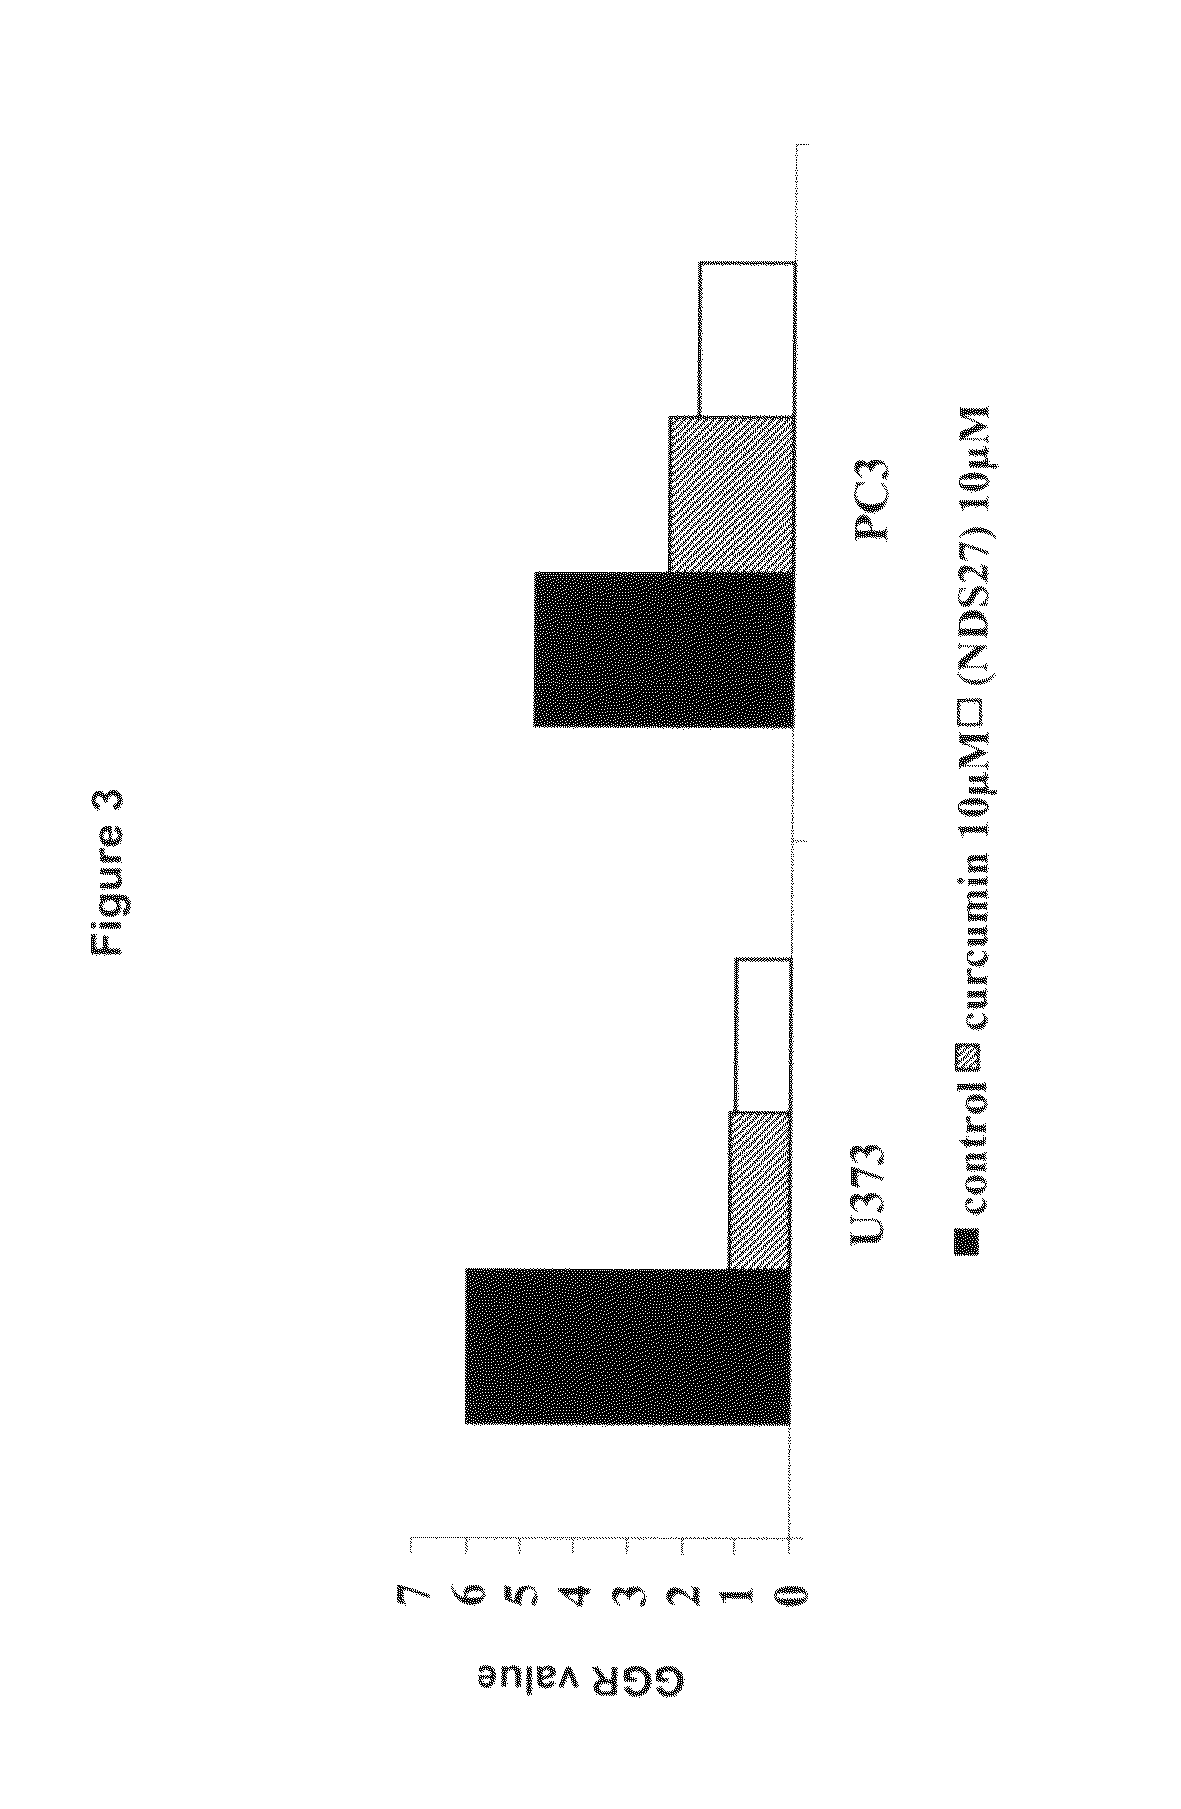 Water soluble curcumin compositions for use in anti-cancer and anti-inflammatory therapy